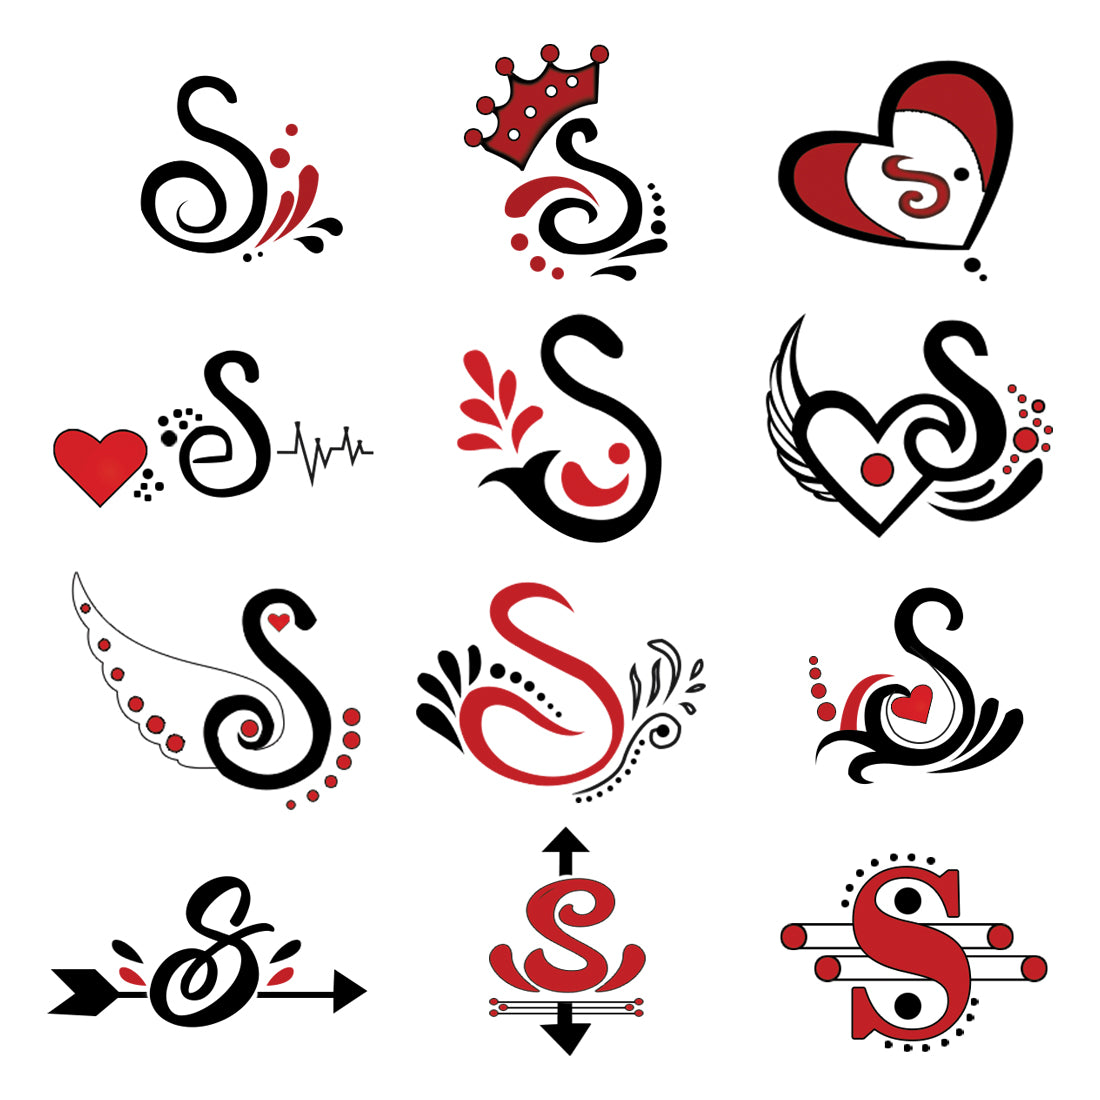 S Name Alphabet Tattoo Waterproof For Men and Women Temporary Body ...